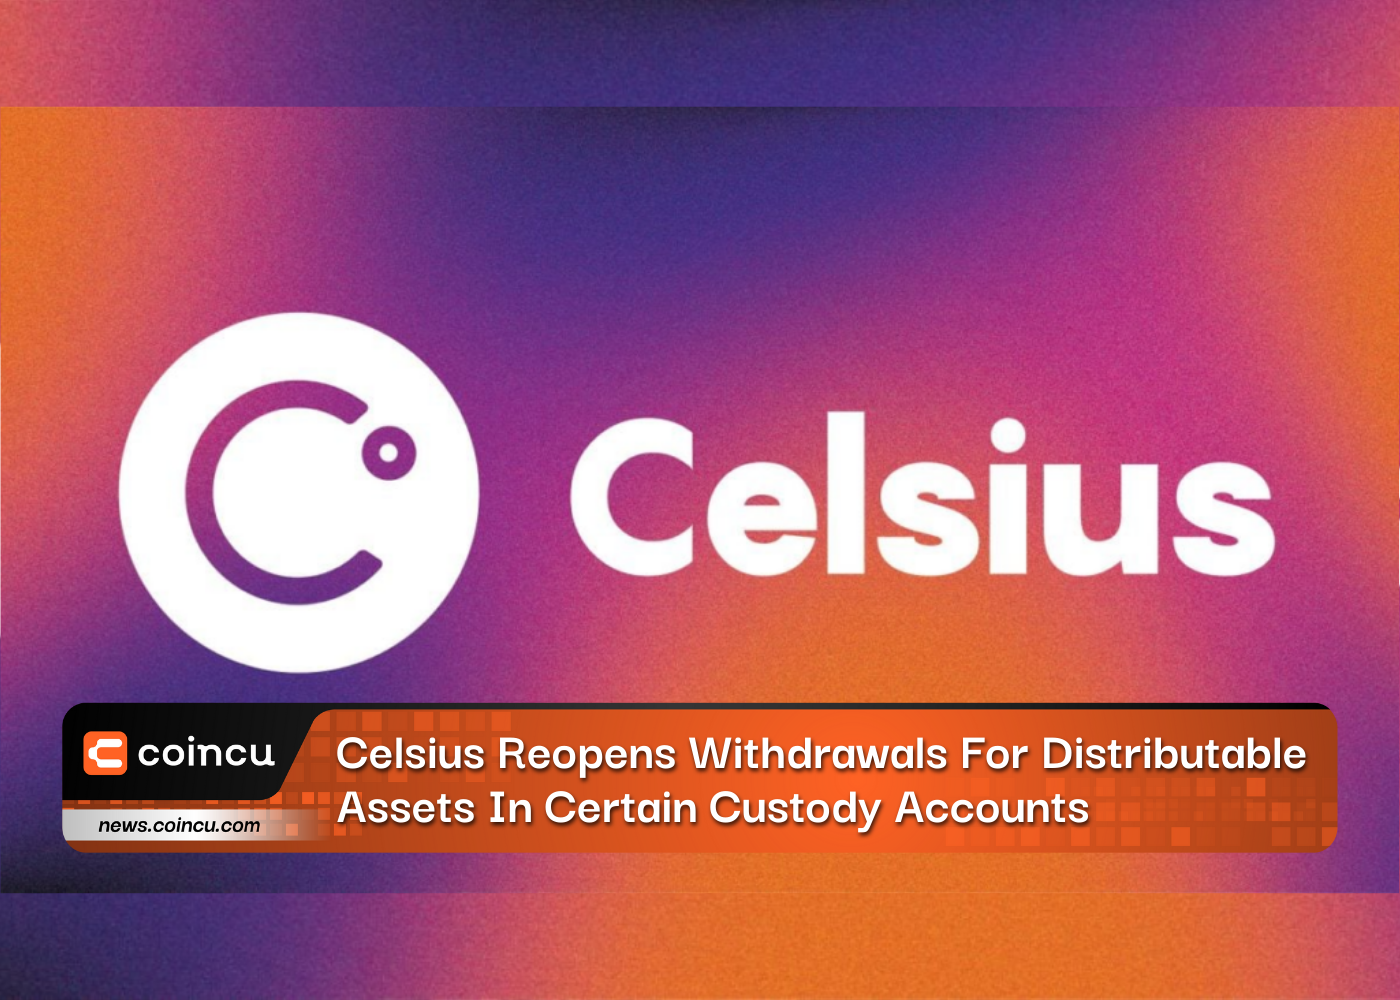 Celsius Reopens Withdrawals For Distributable Assets In Certain Custody Accounts